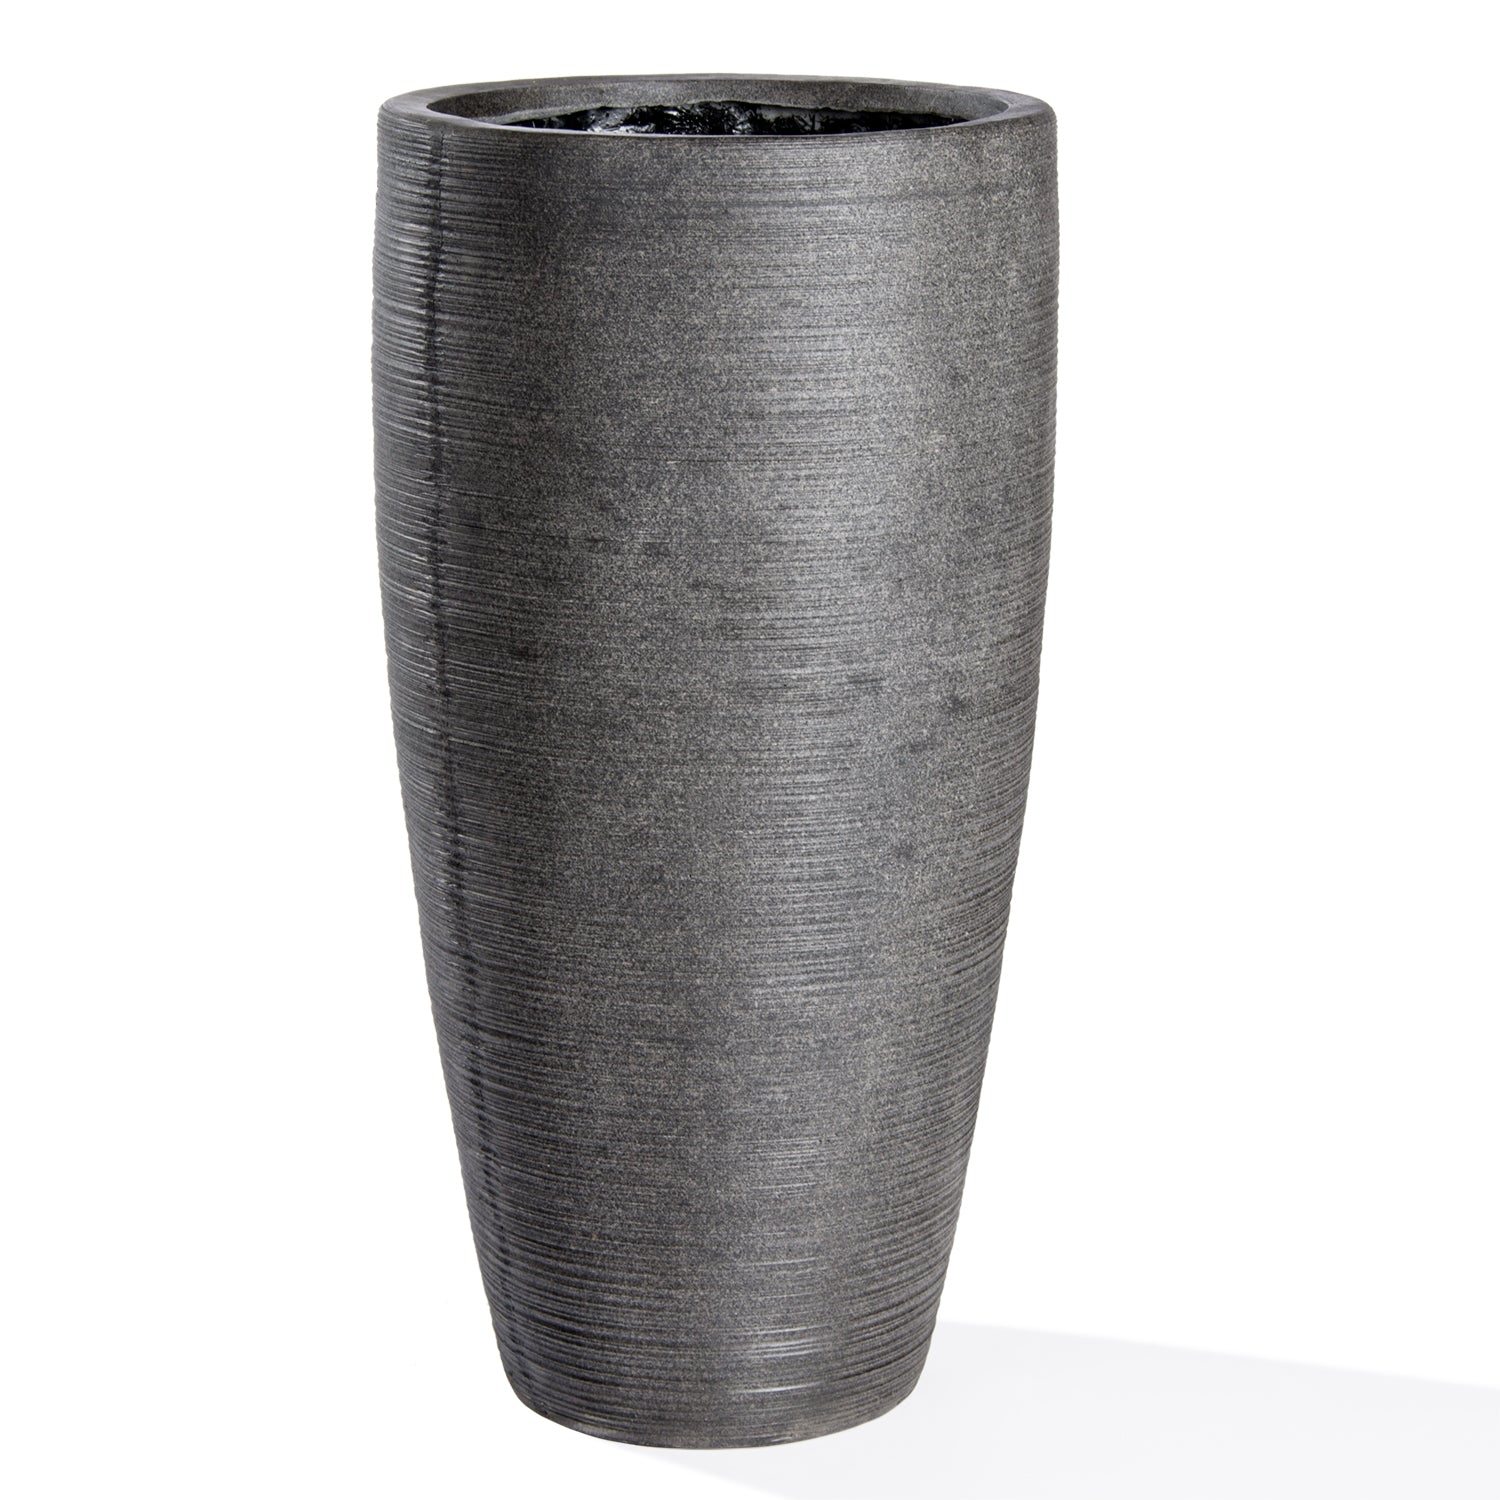 Distressed Textured: Ishi Flared Planter, 31.5"H